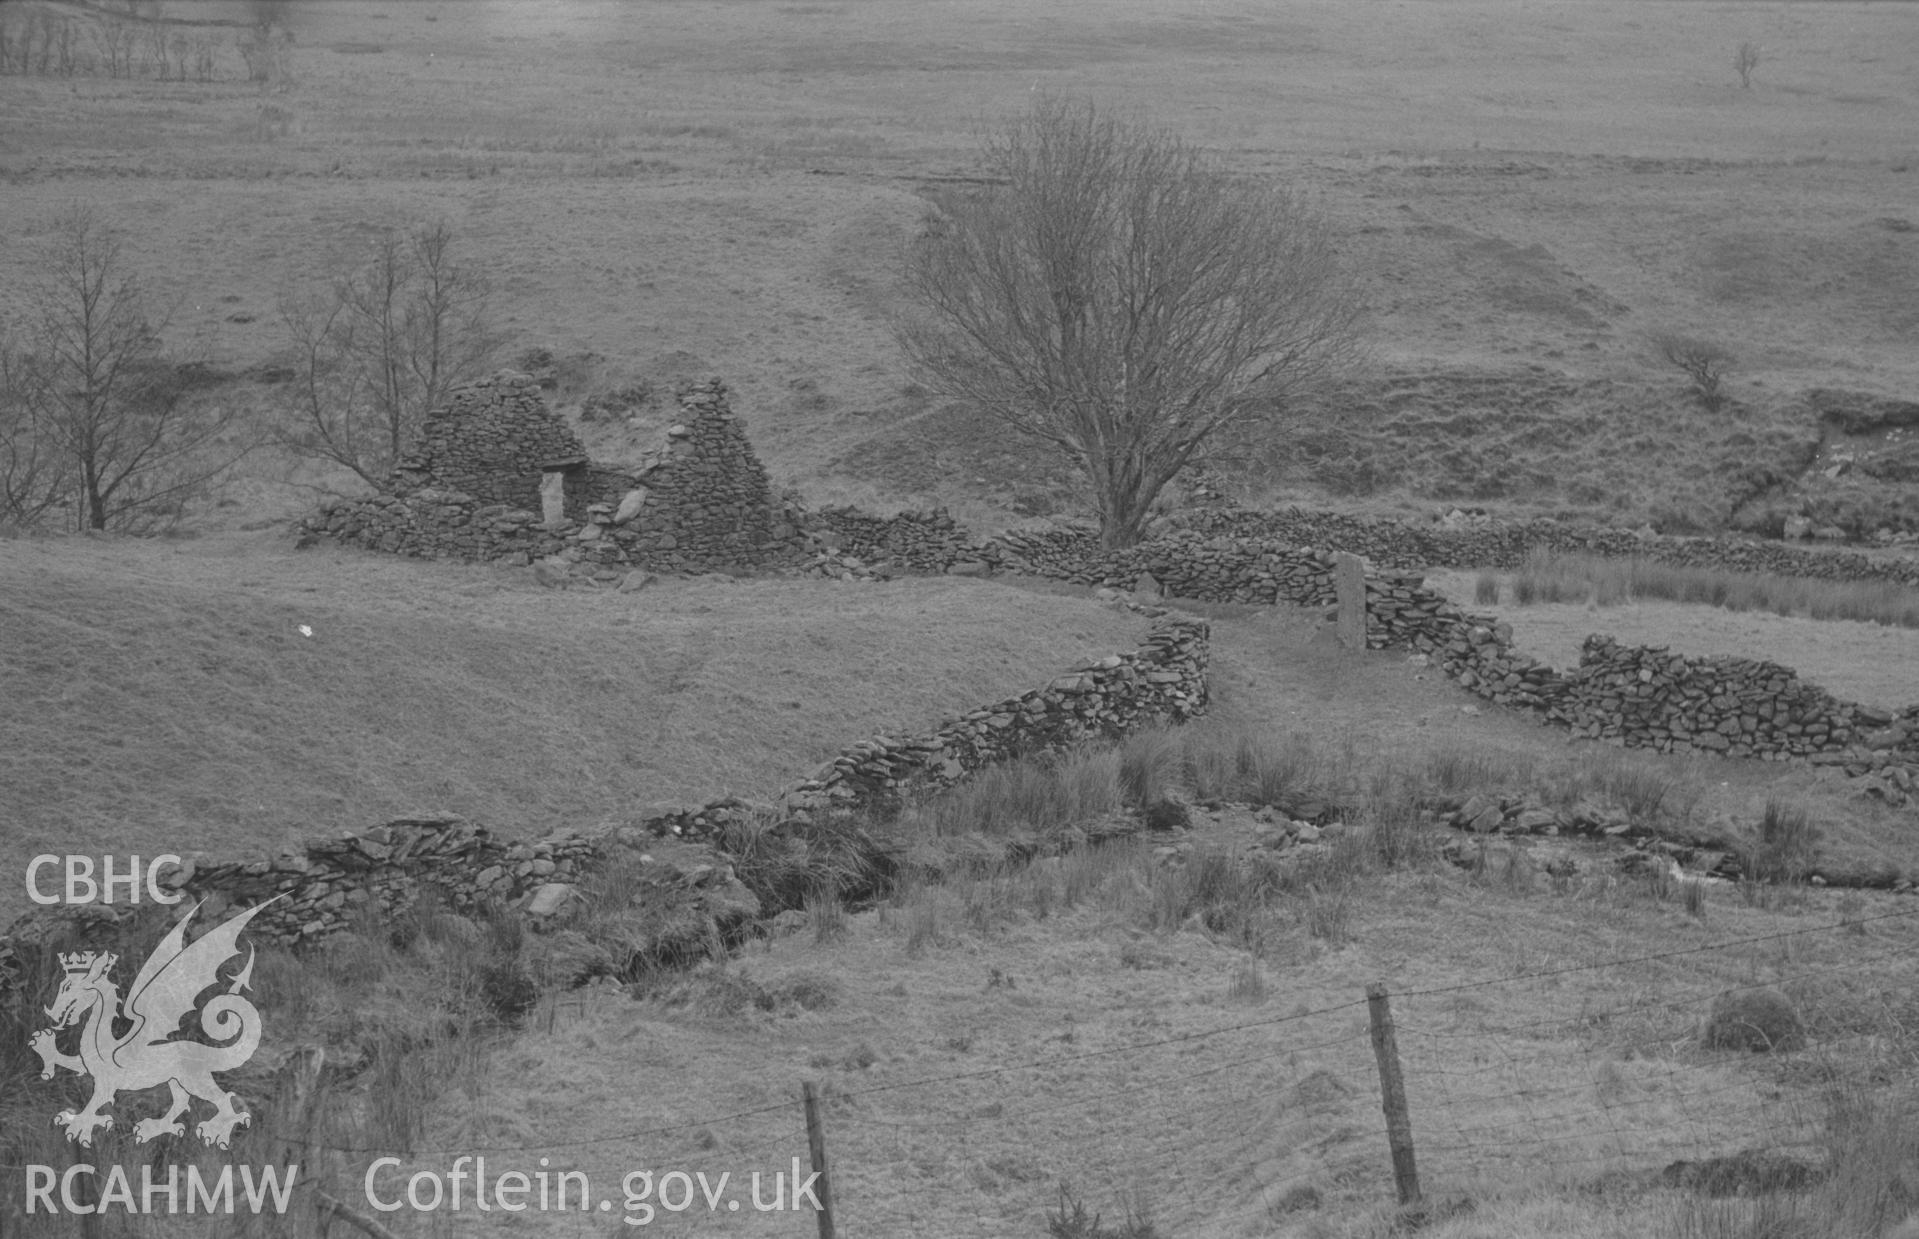 Black and White photograph showing ruined house by the confluence of Groes Fawr and Groes Fechan, 900ft. Photographed by Arthur Chater in April 1962 from Grid Reference SN 720 604, looking south west.